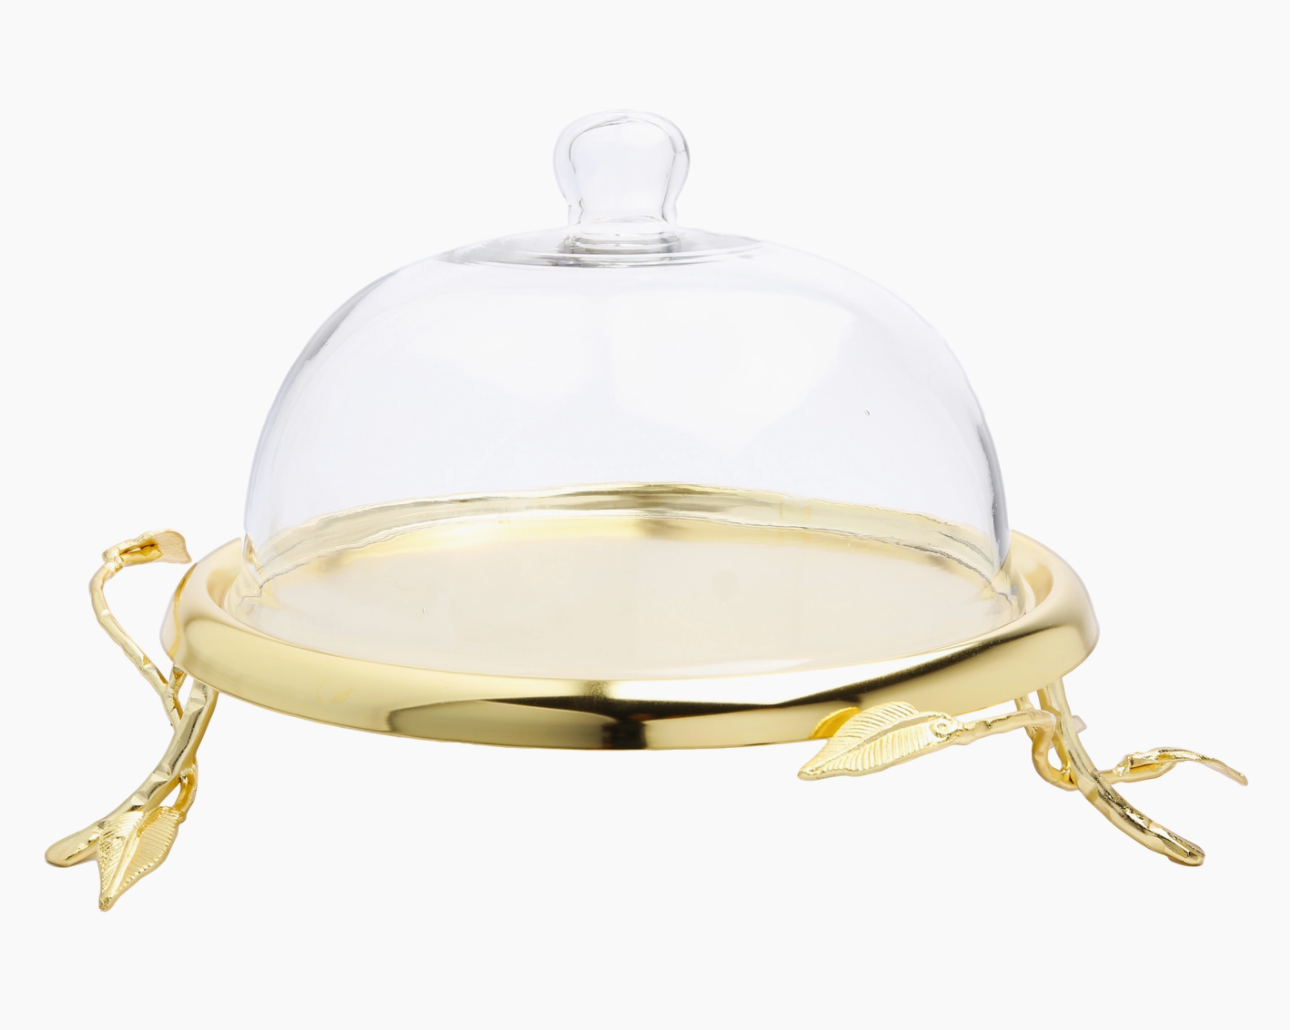 Gold Leaf Cake Plate with Glass Dome